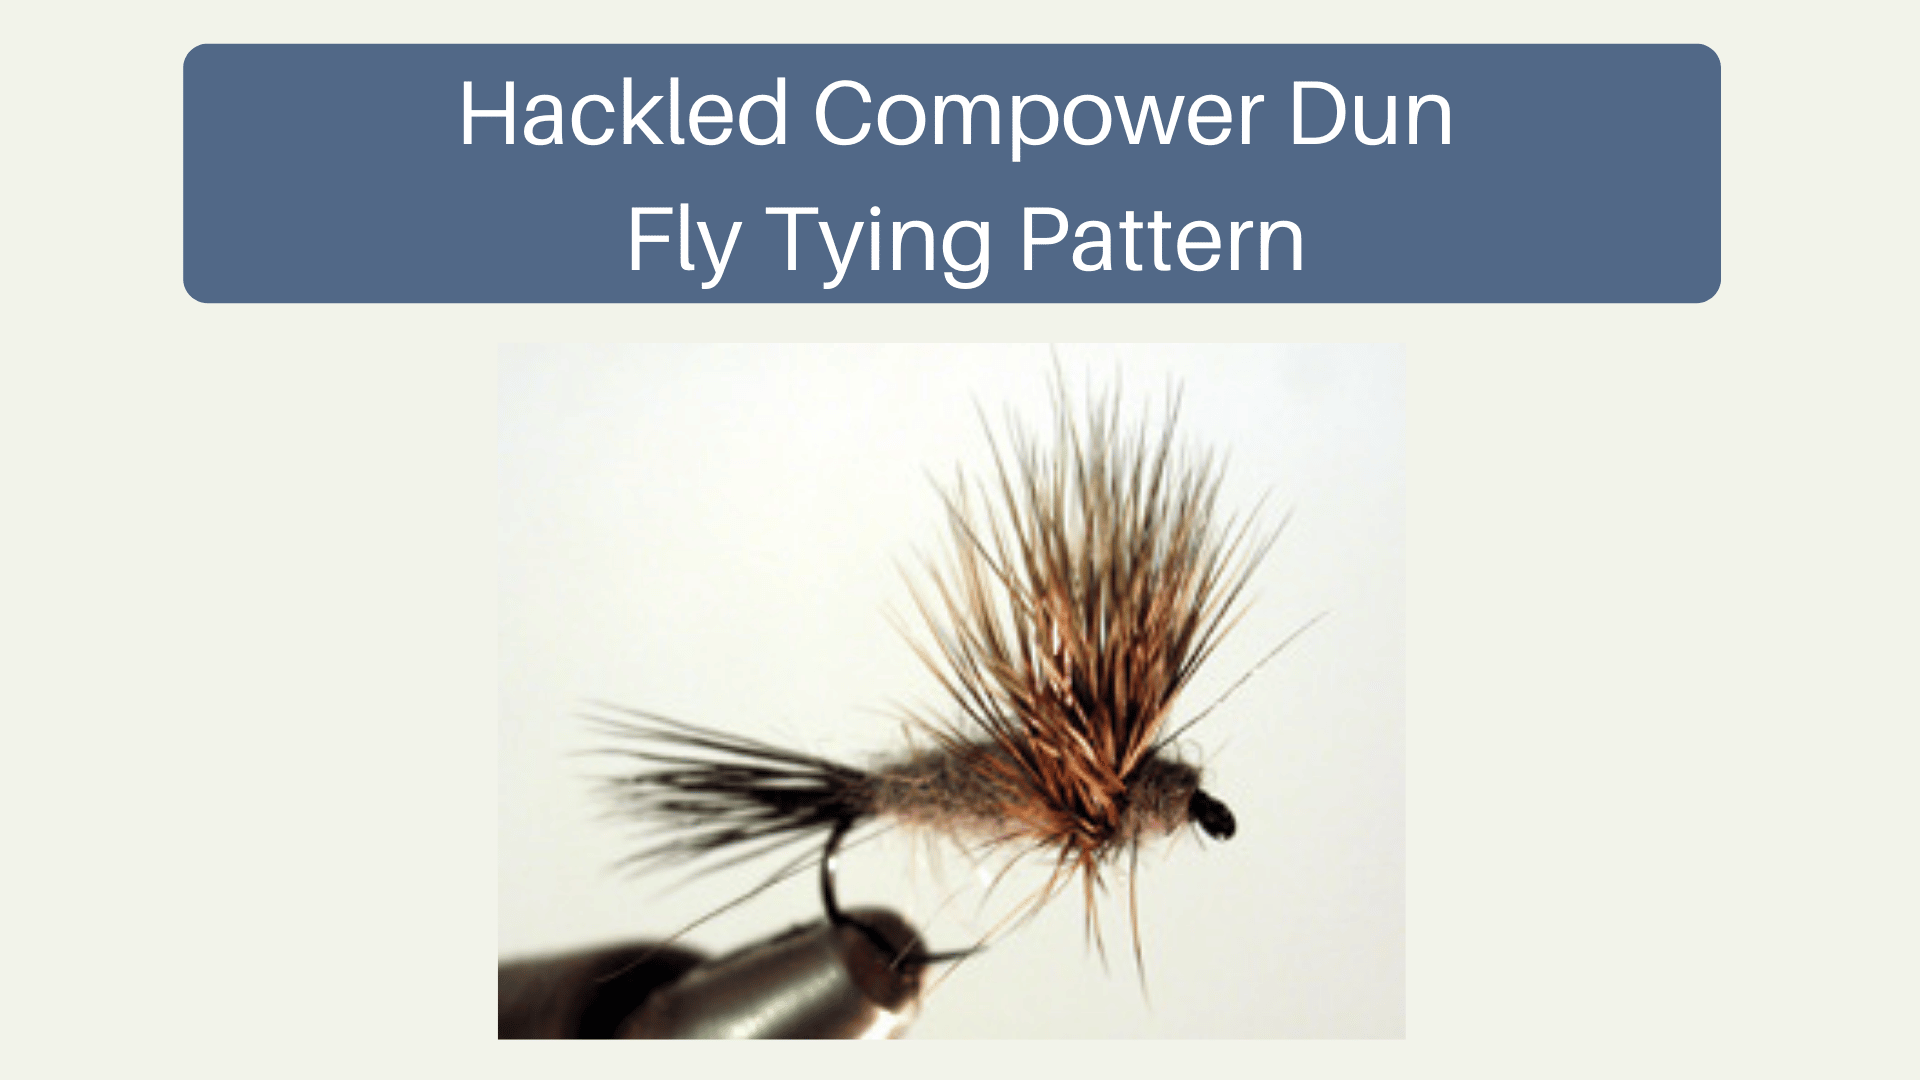 Hackled Compower Dun Fly Tying Pattern